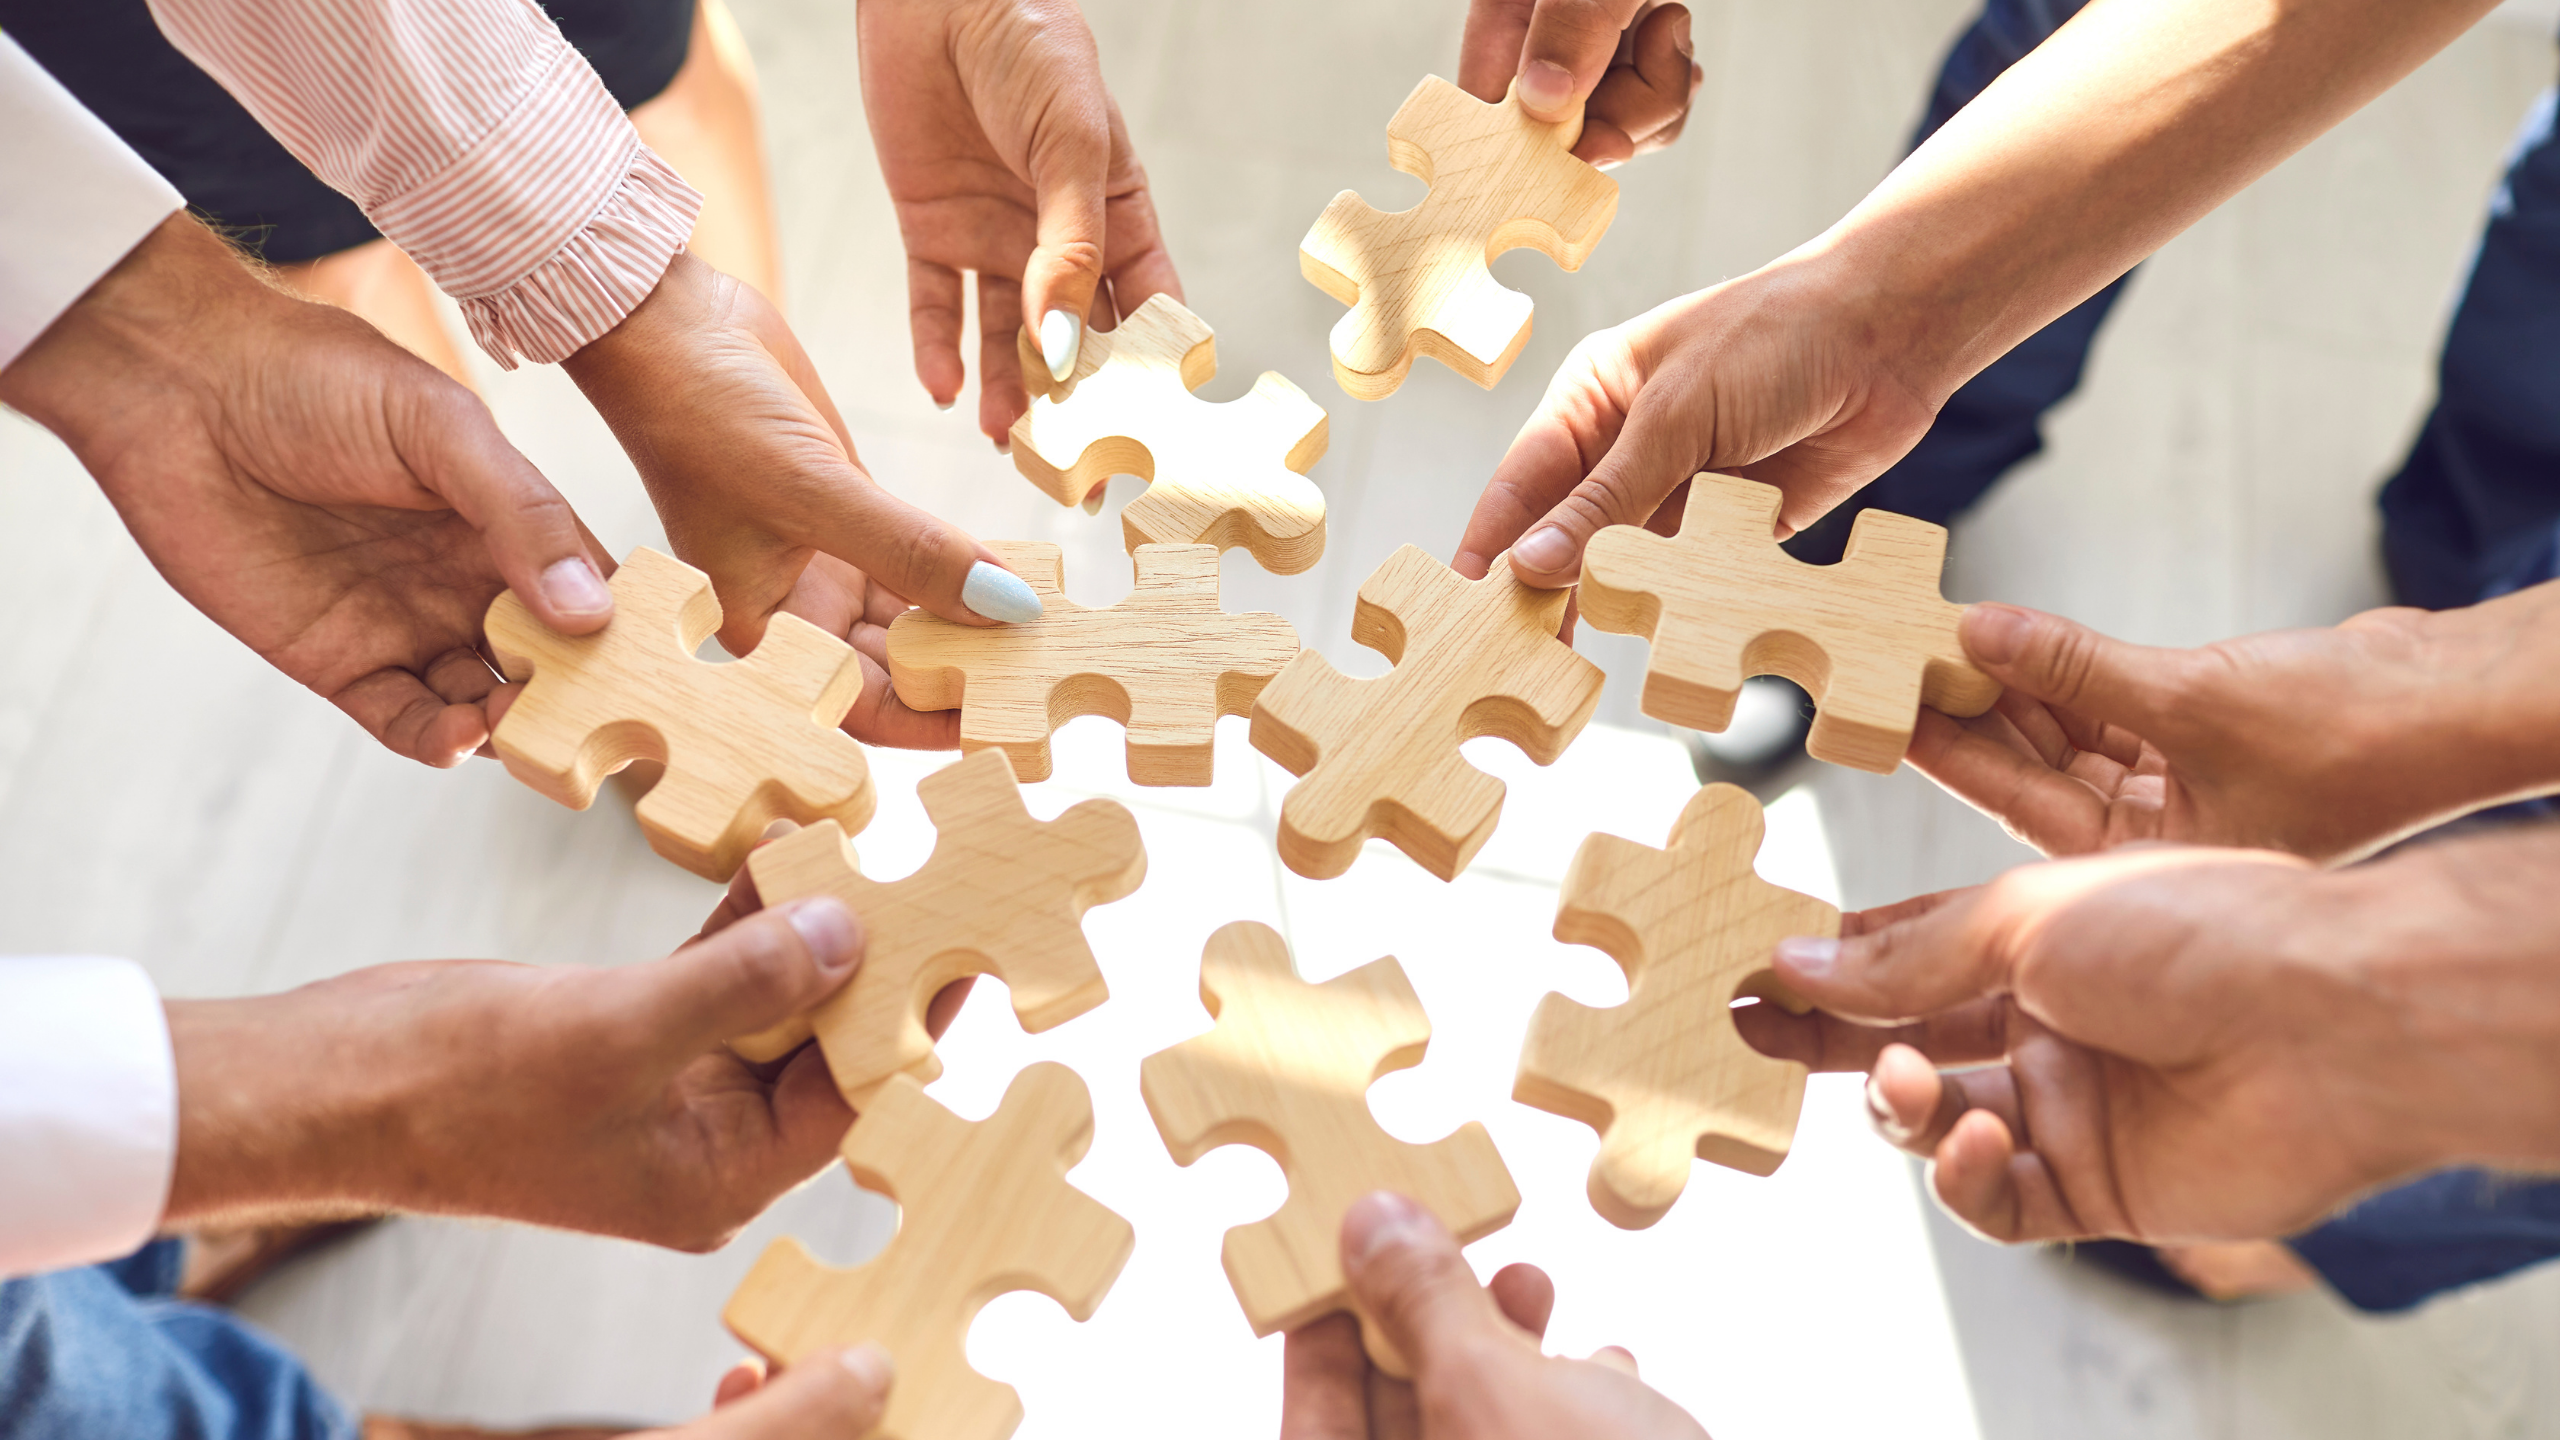 Group of people holding puzzle pieces